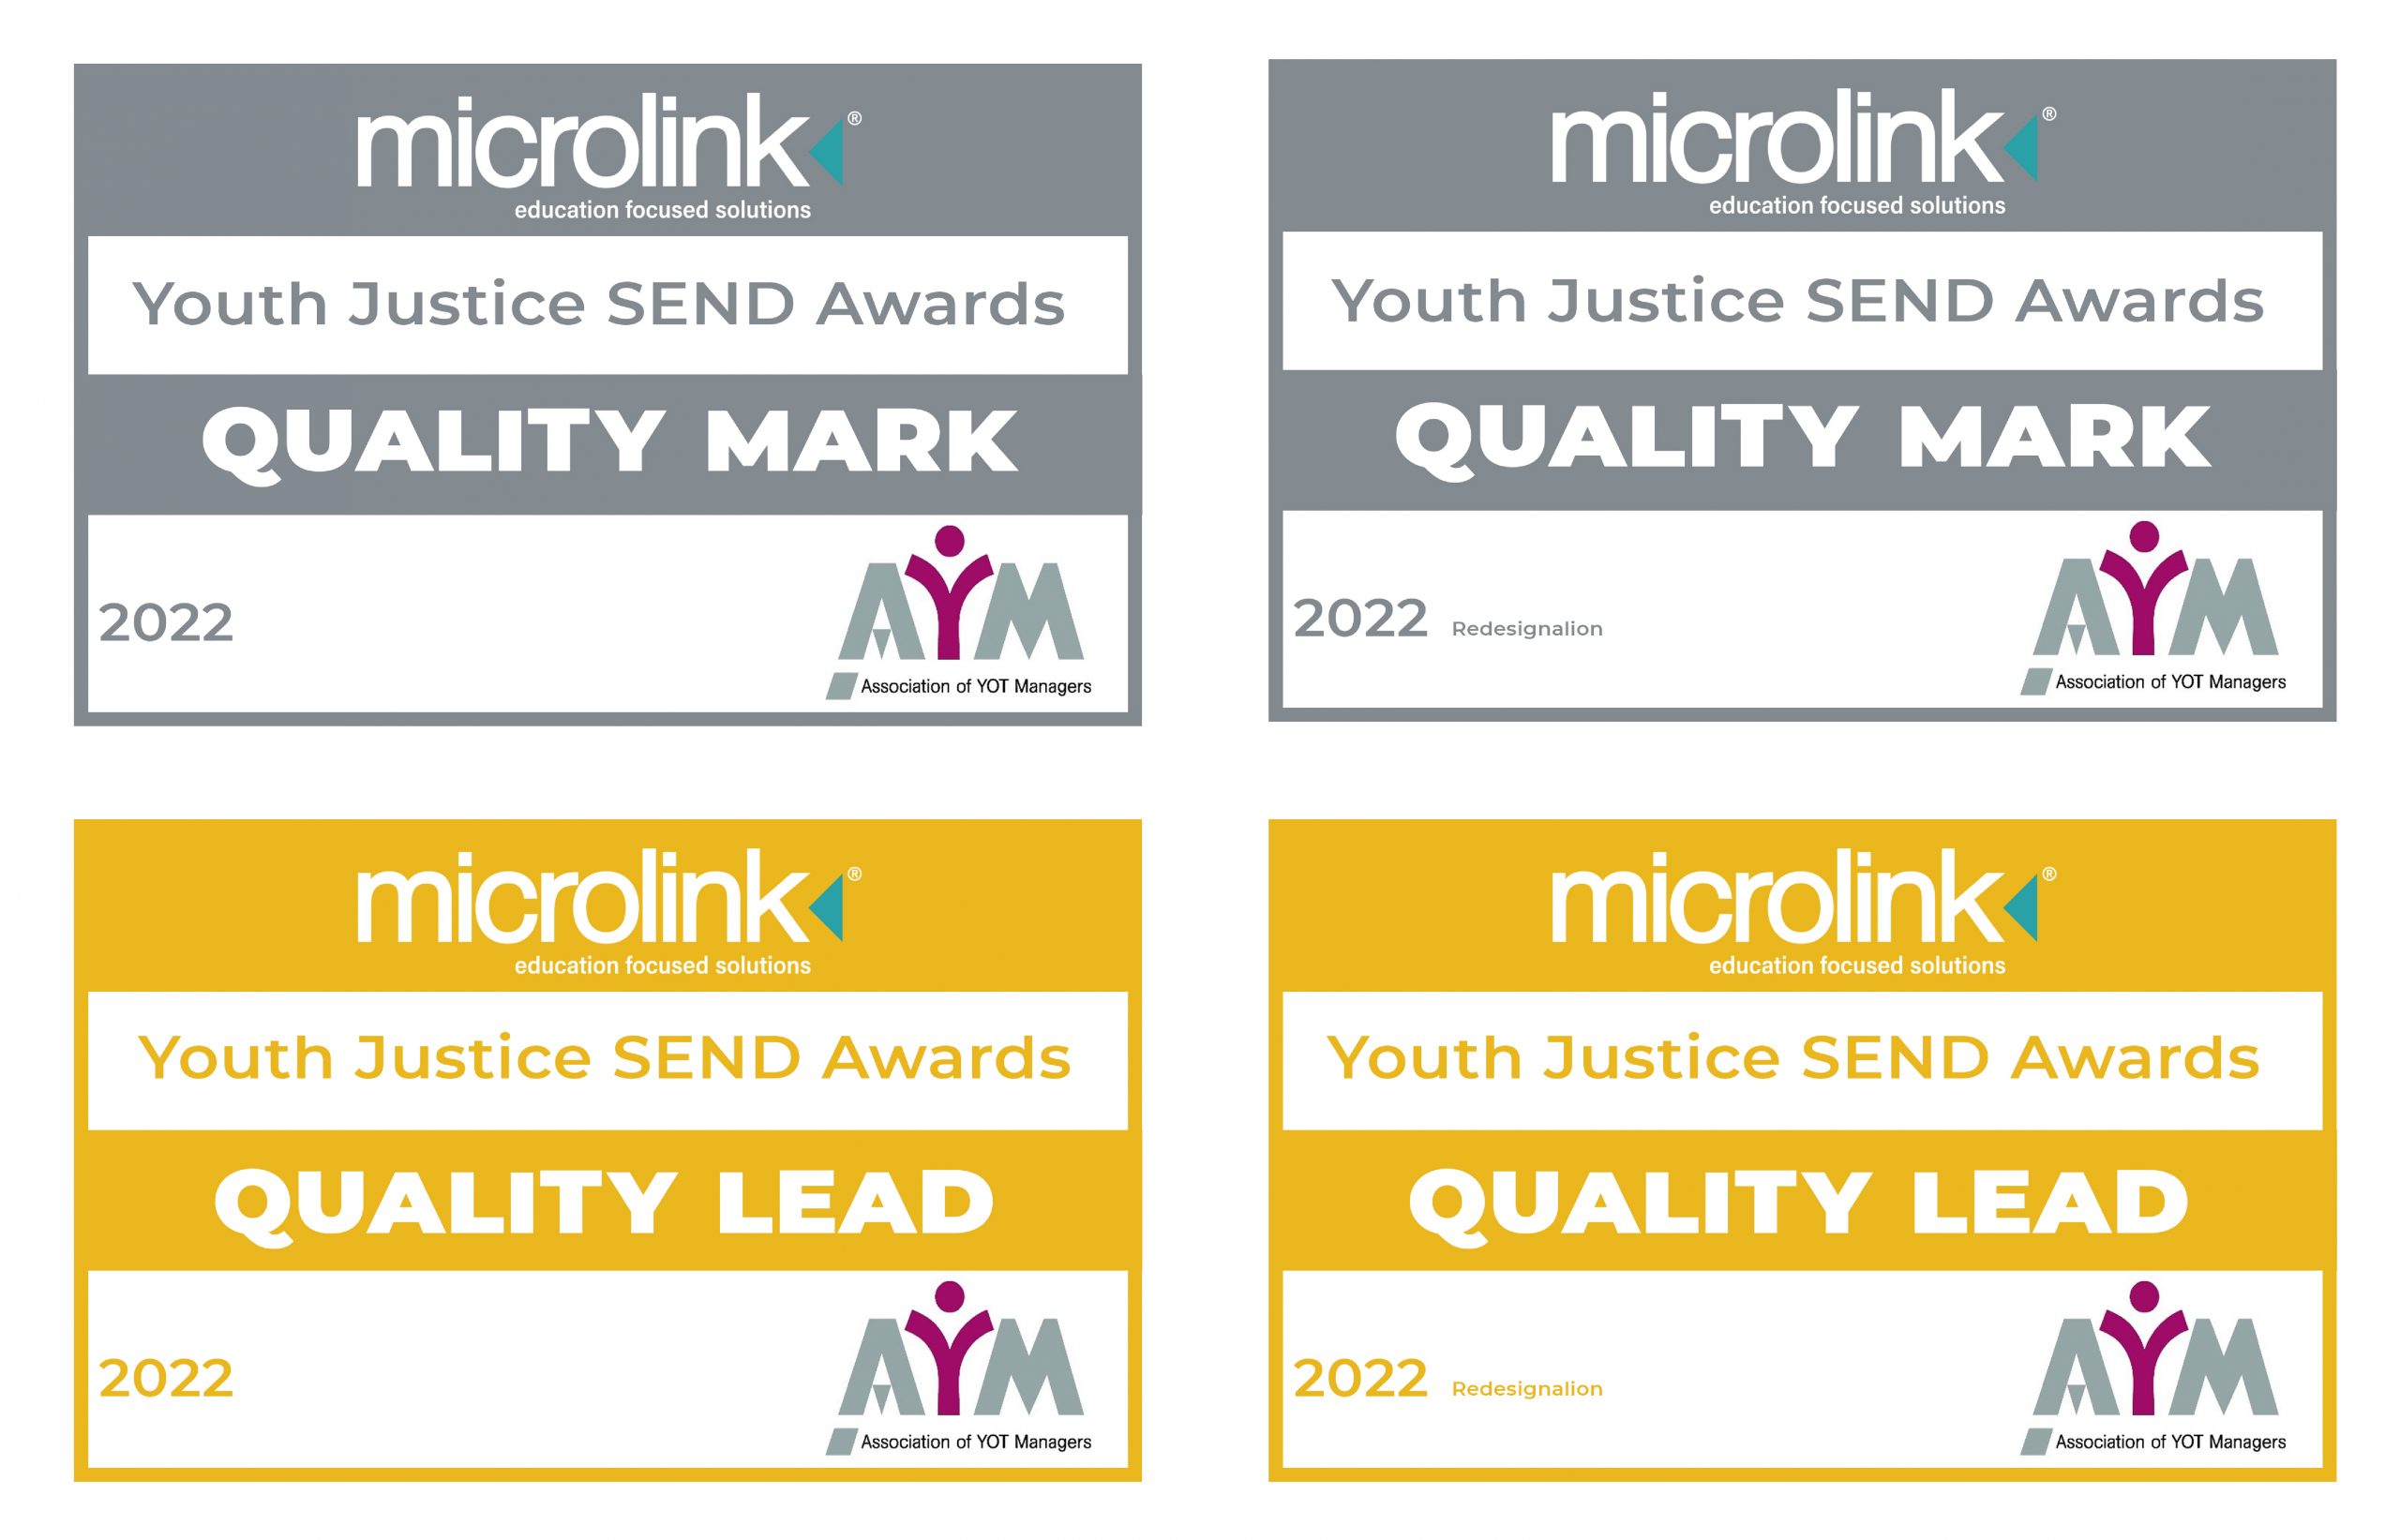 Youth justice awards Quality lead and quality mark